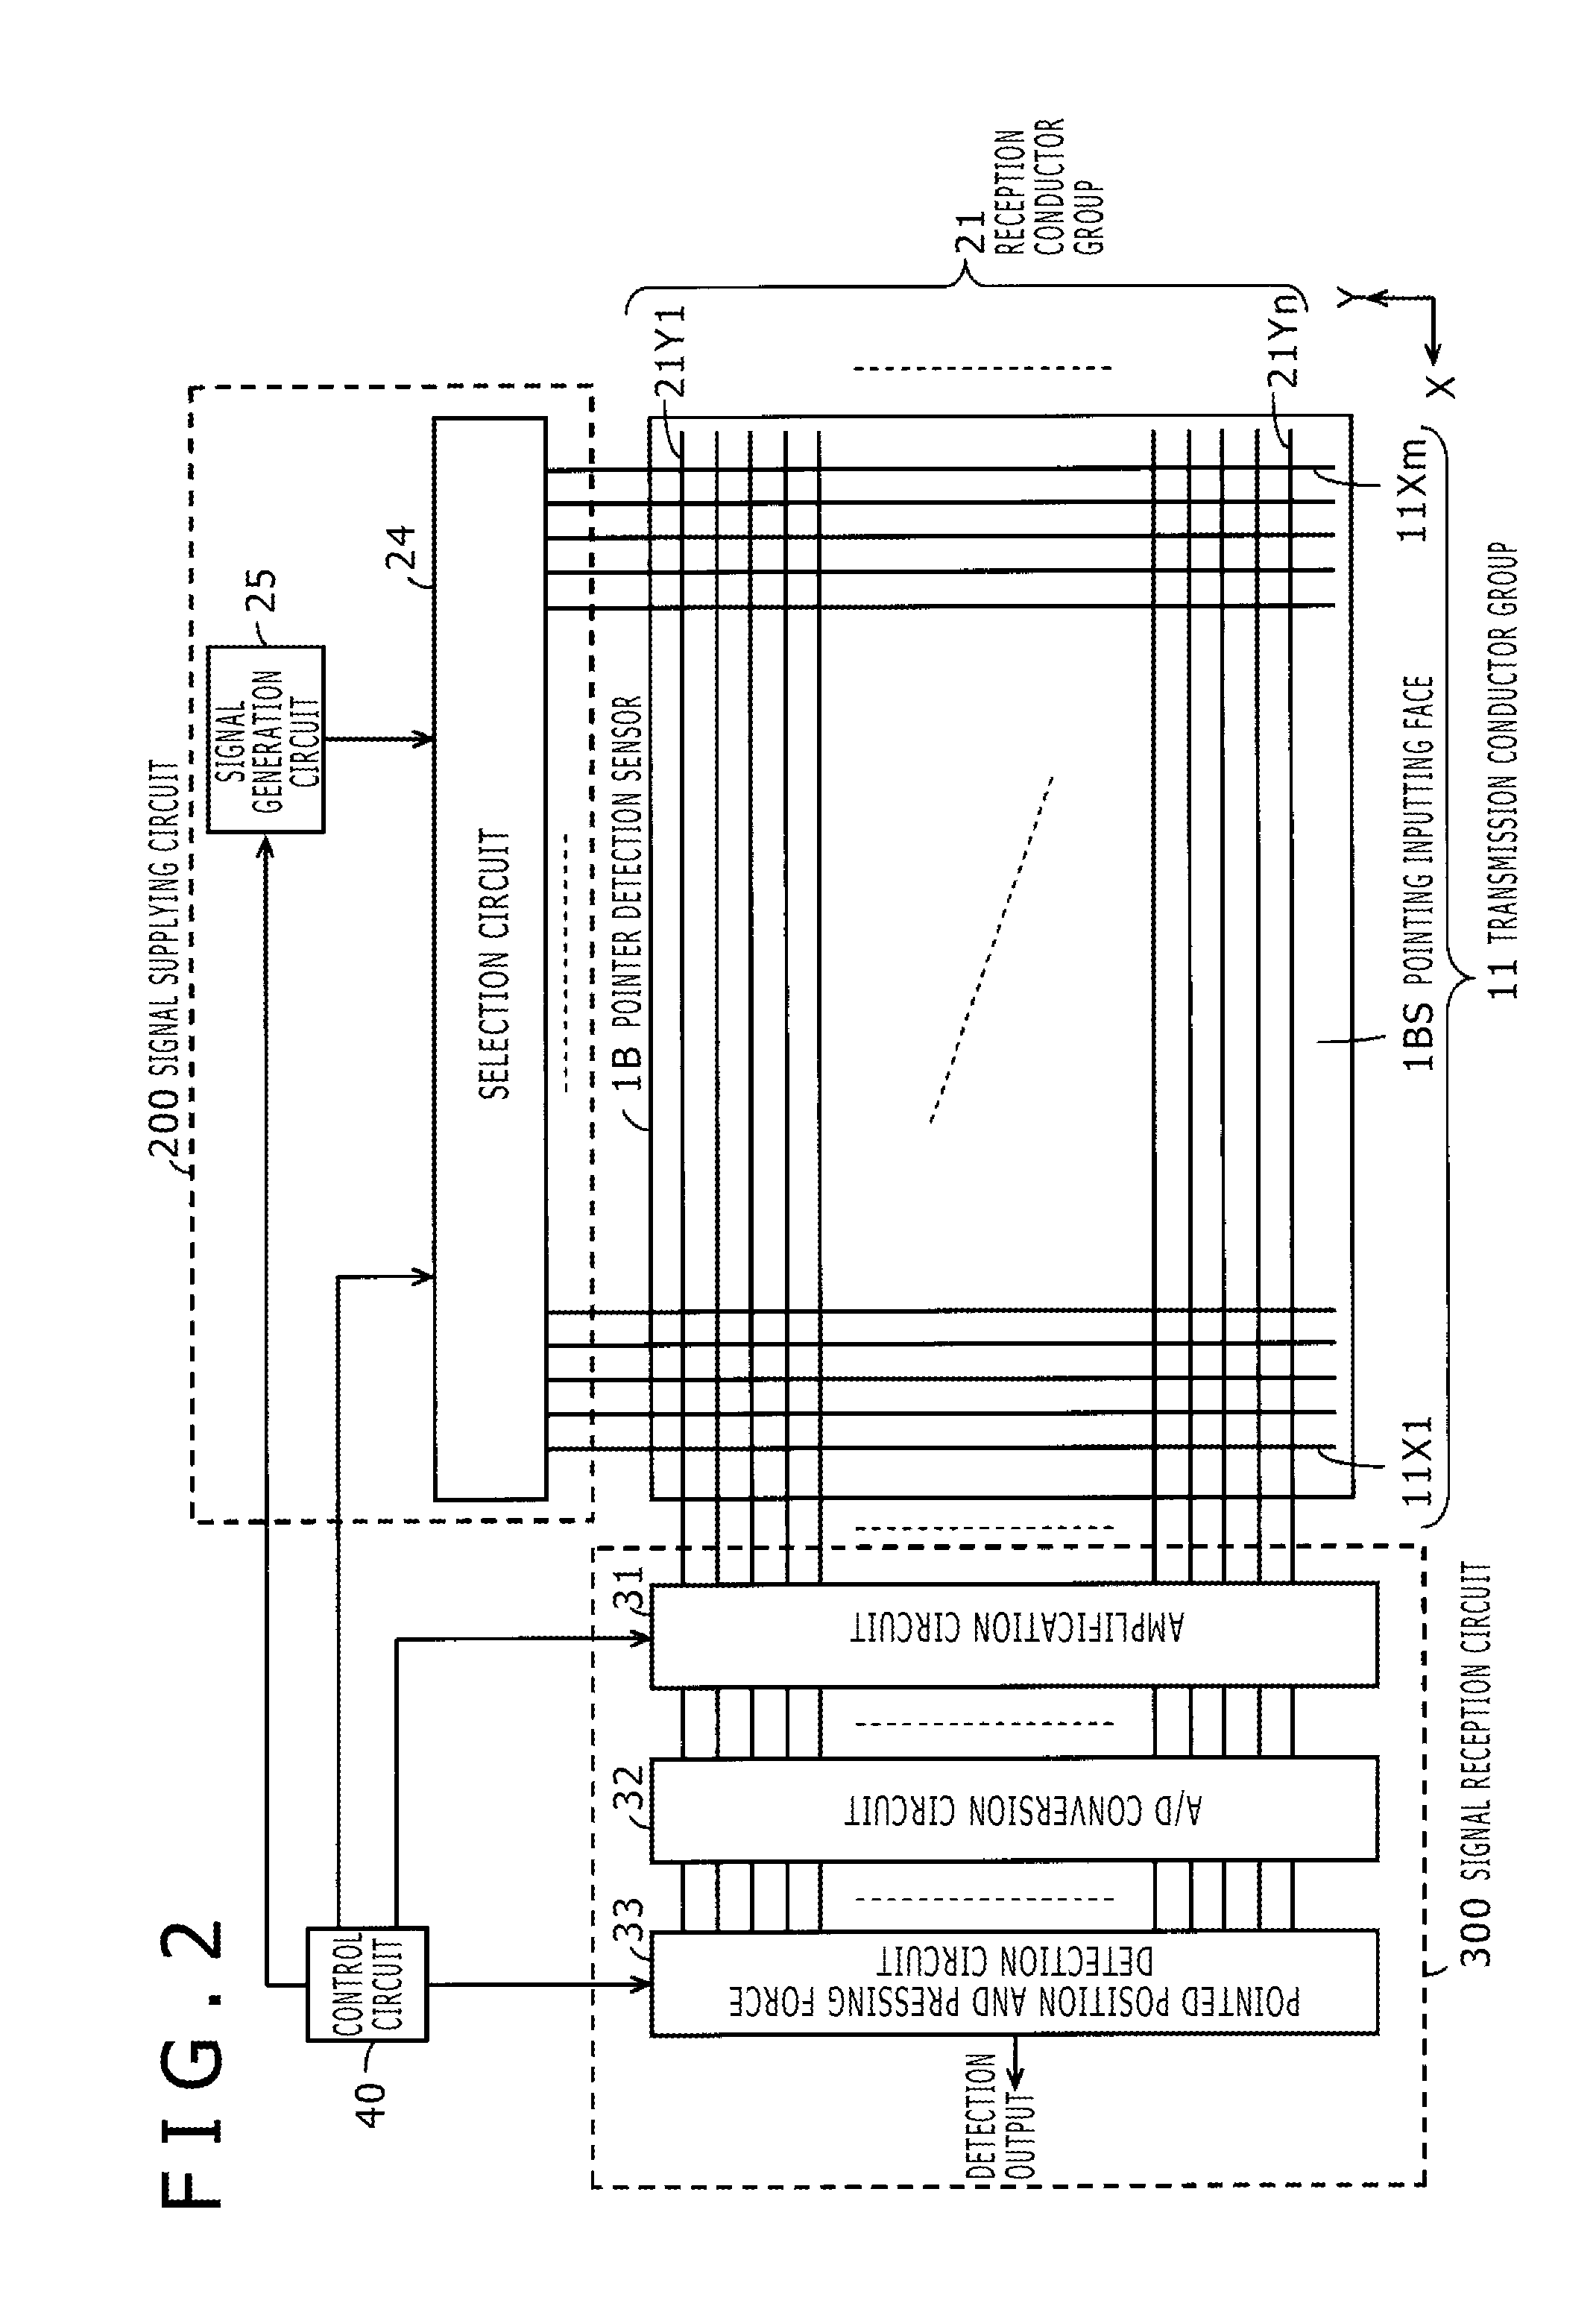 Pointer detection sensor and fabrication method for pointer detection sensor